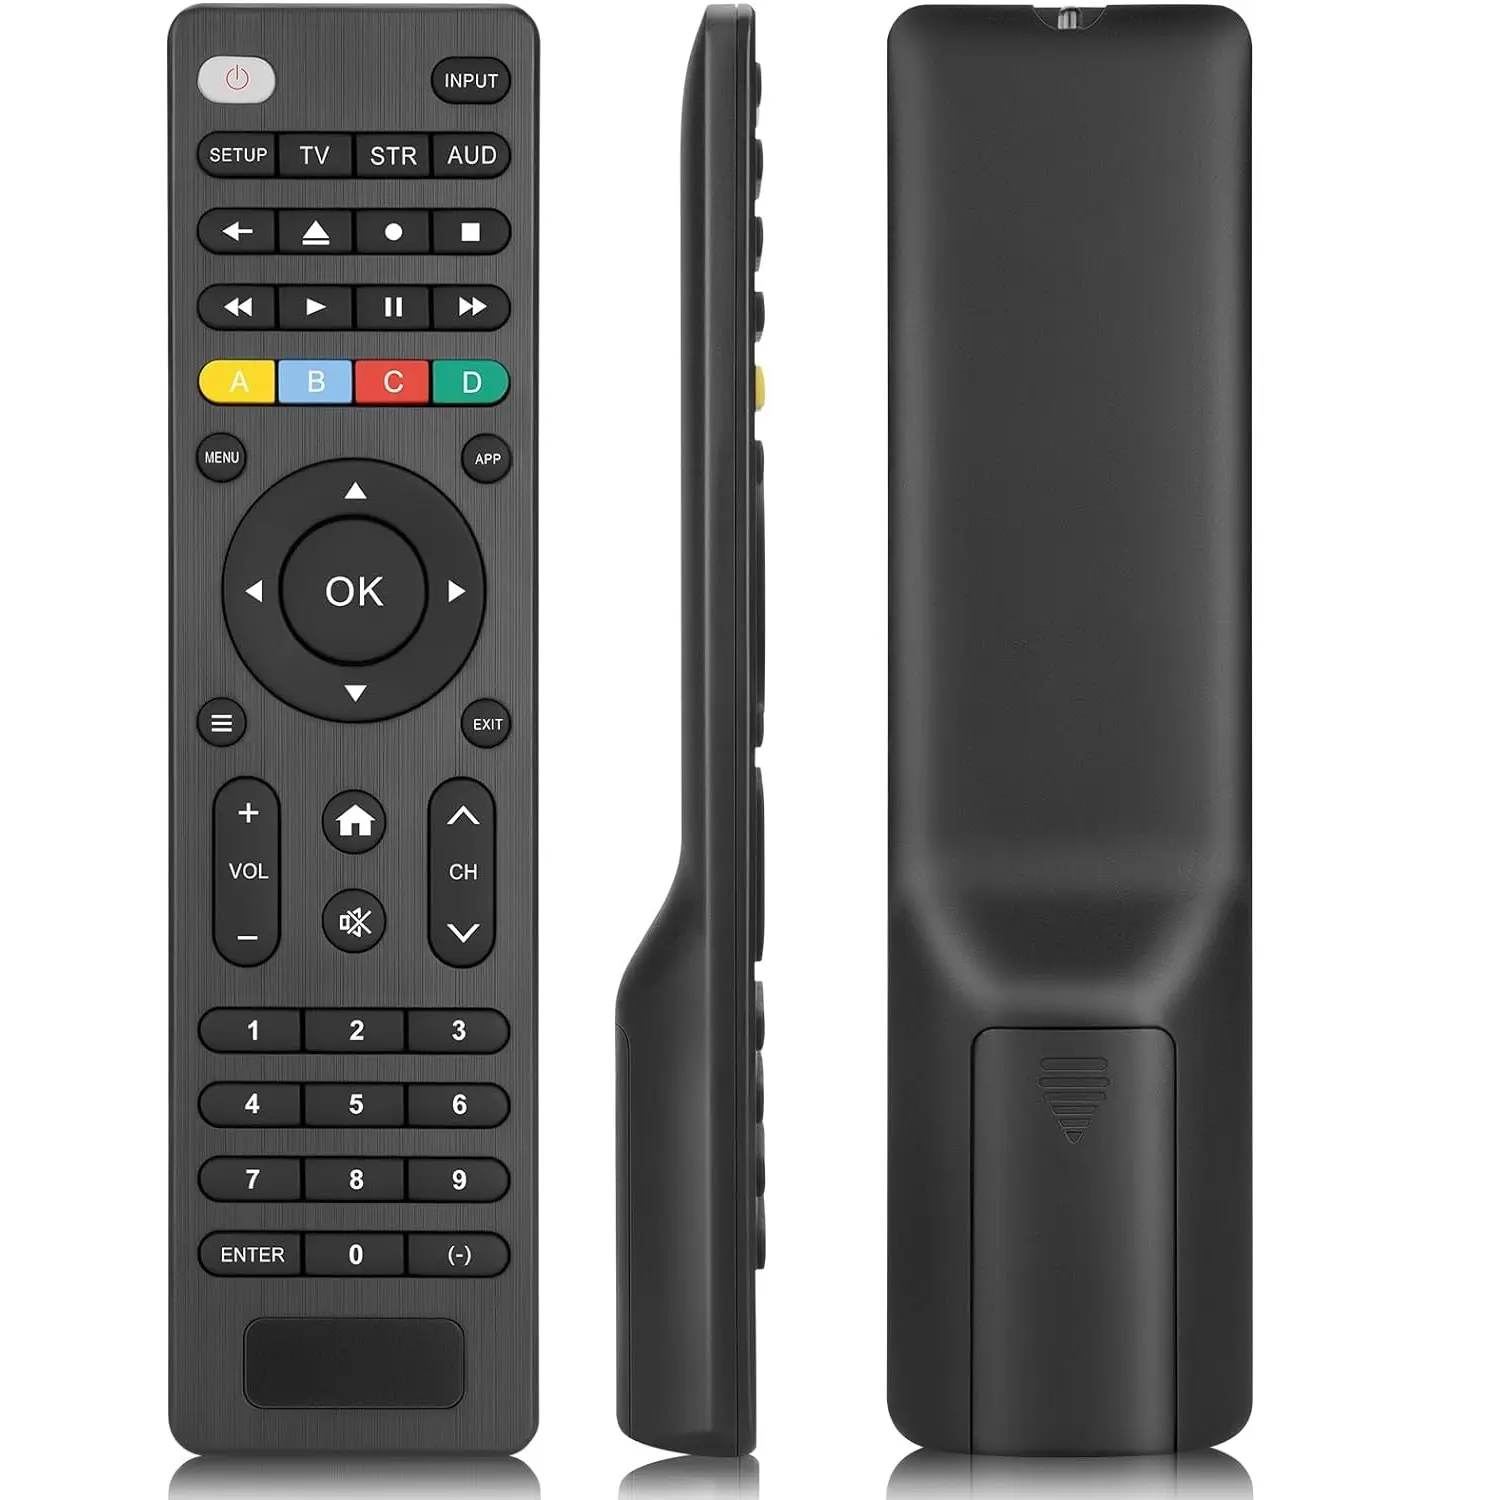 Universal Remote Control Replacement work for Samsung LG Sony Hisense TCL Insiginia Toshiba Emerson Vizio and More Brands